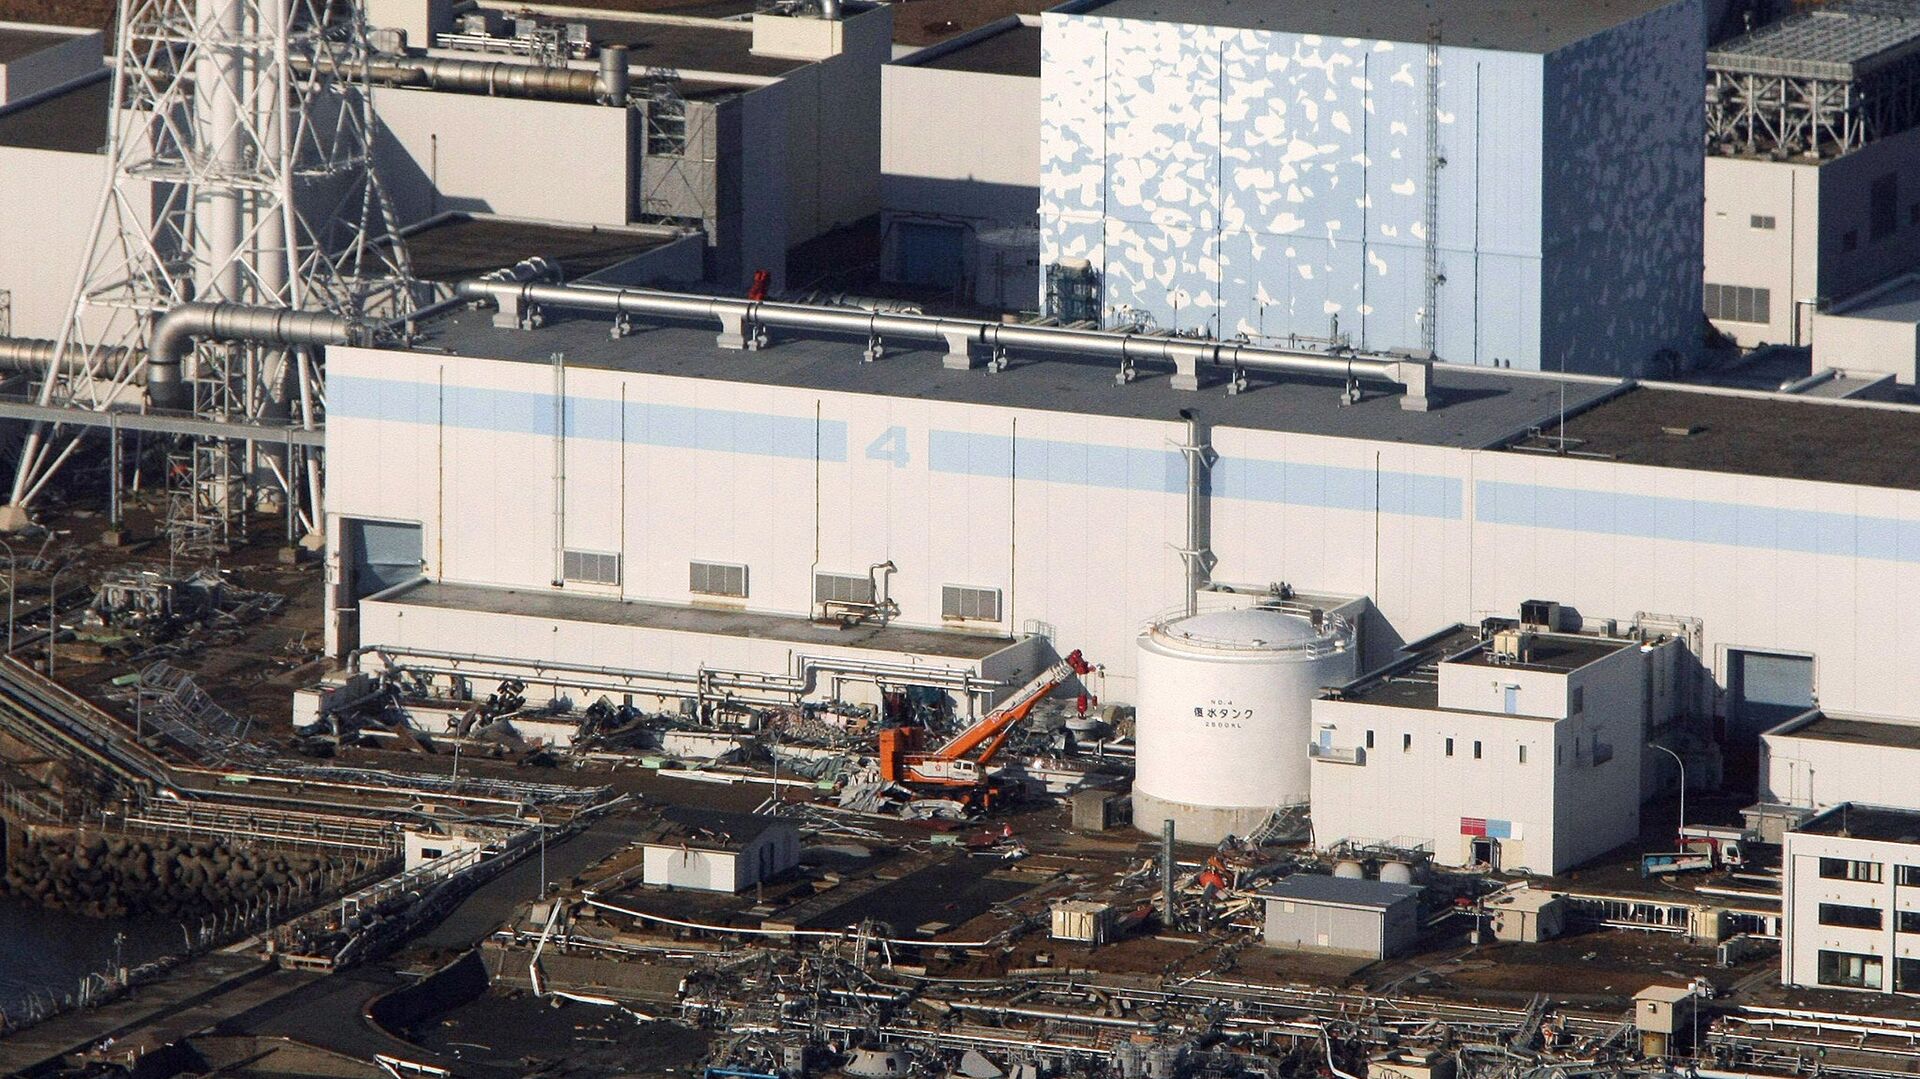 An aerial view shows the quake-damaged Fukushima nuclear power plant in the Japanese town of Futaba, Fukushima prefecture on March 12, 2011. (File) - Sputnik International, 1920, 01.09.2023